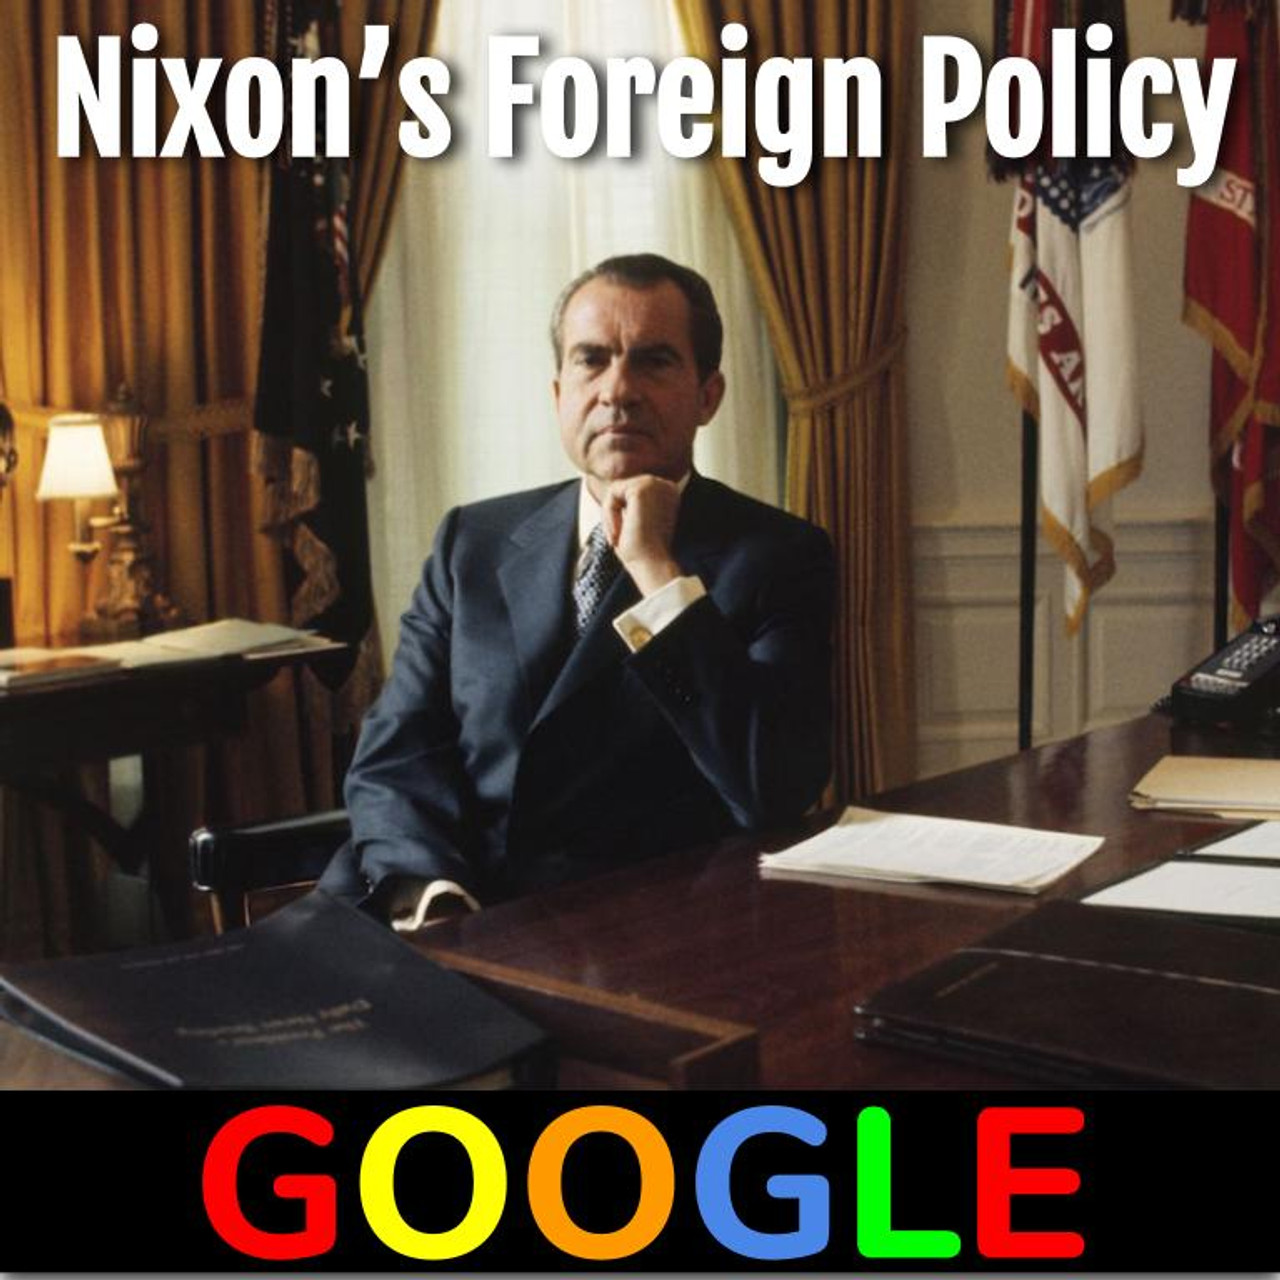 Interactive Map: Nixon’s Foreign Policy